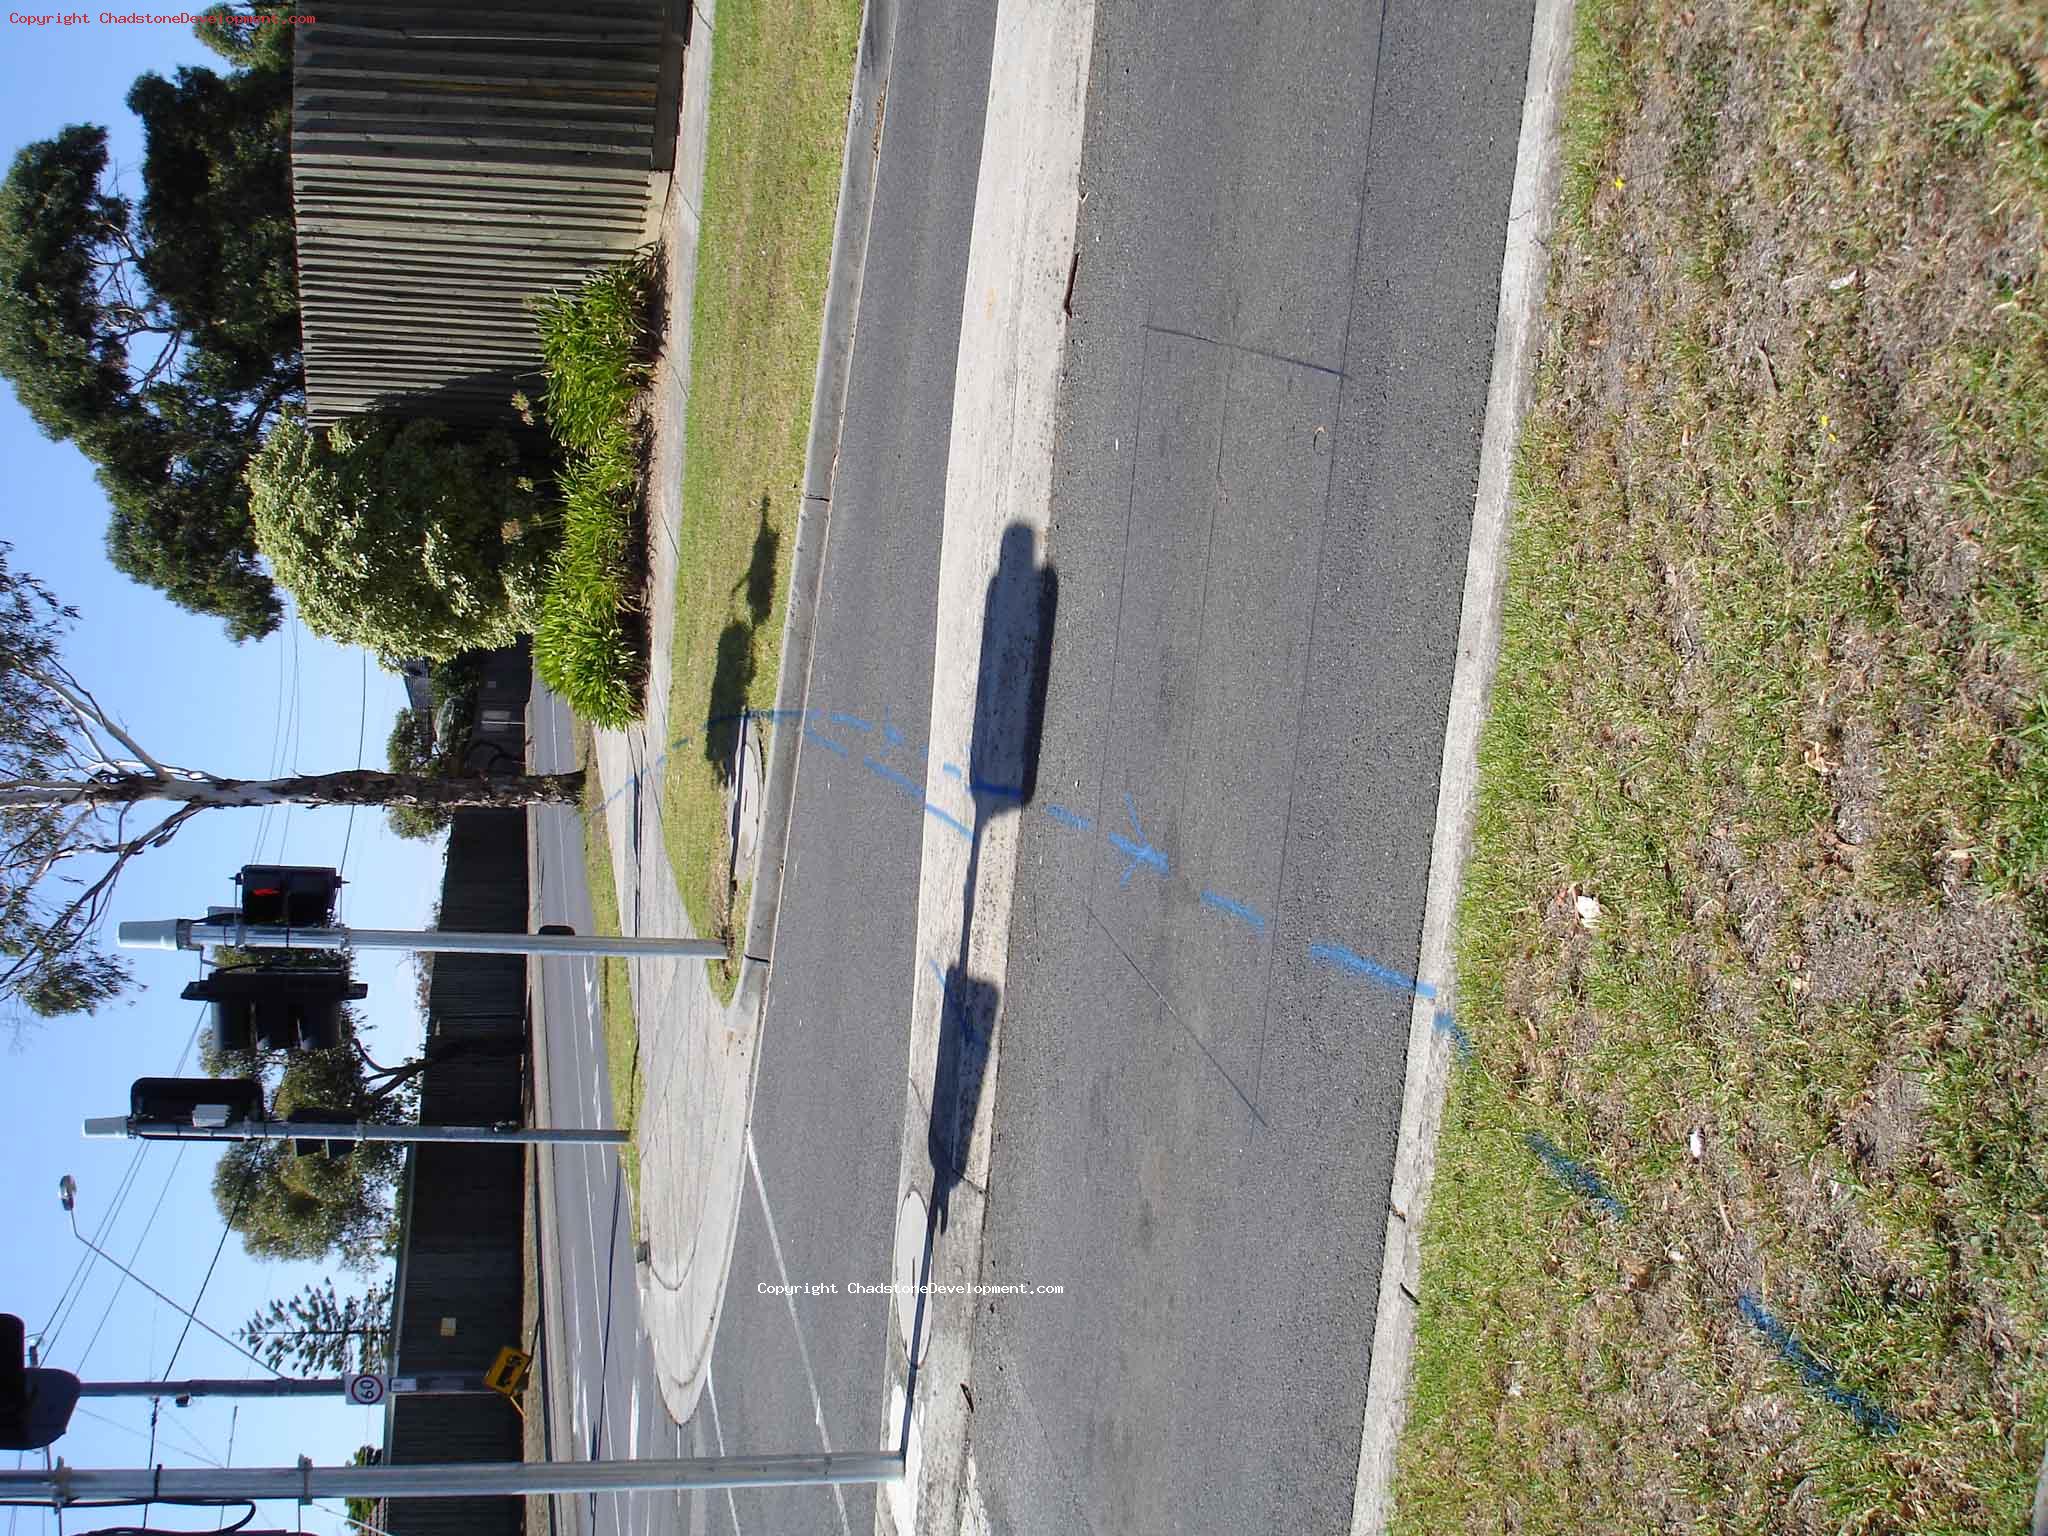 Spray marking for capon St roadblock - Chadstone Development Discussions